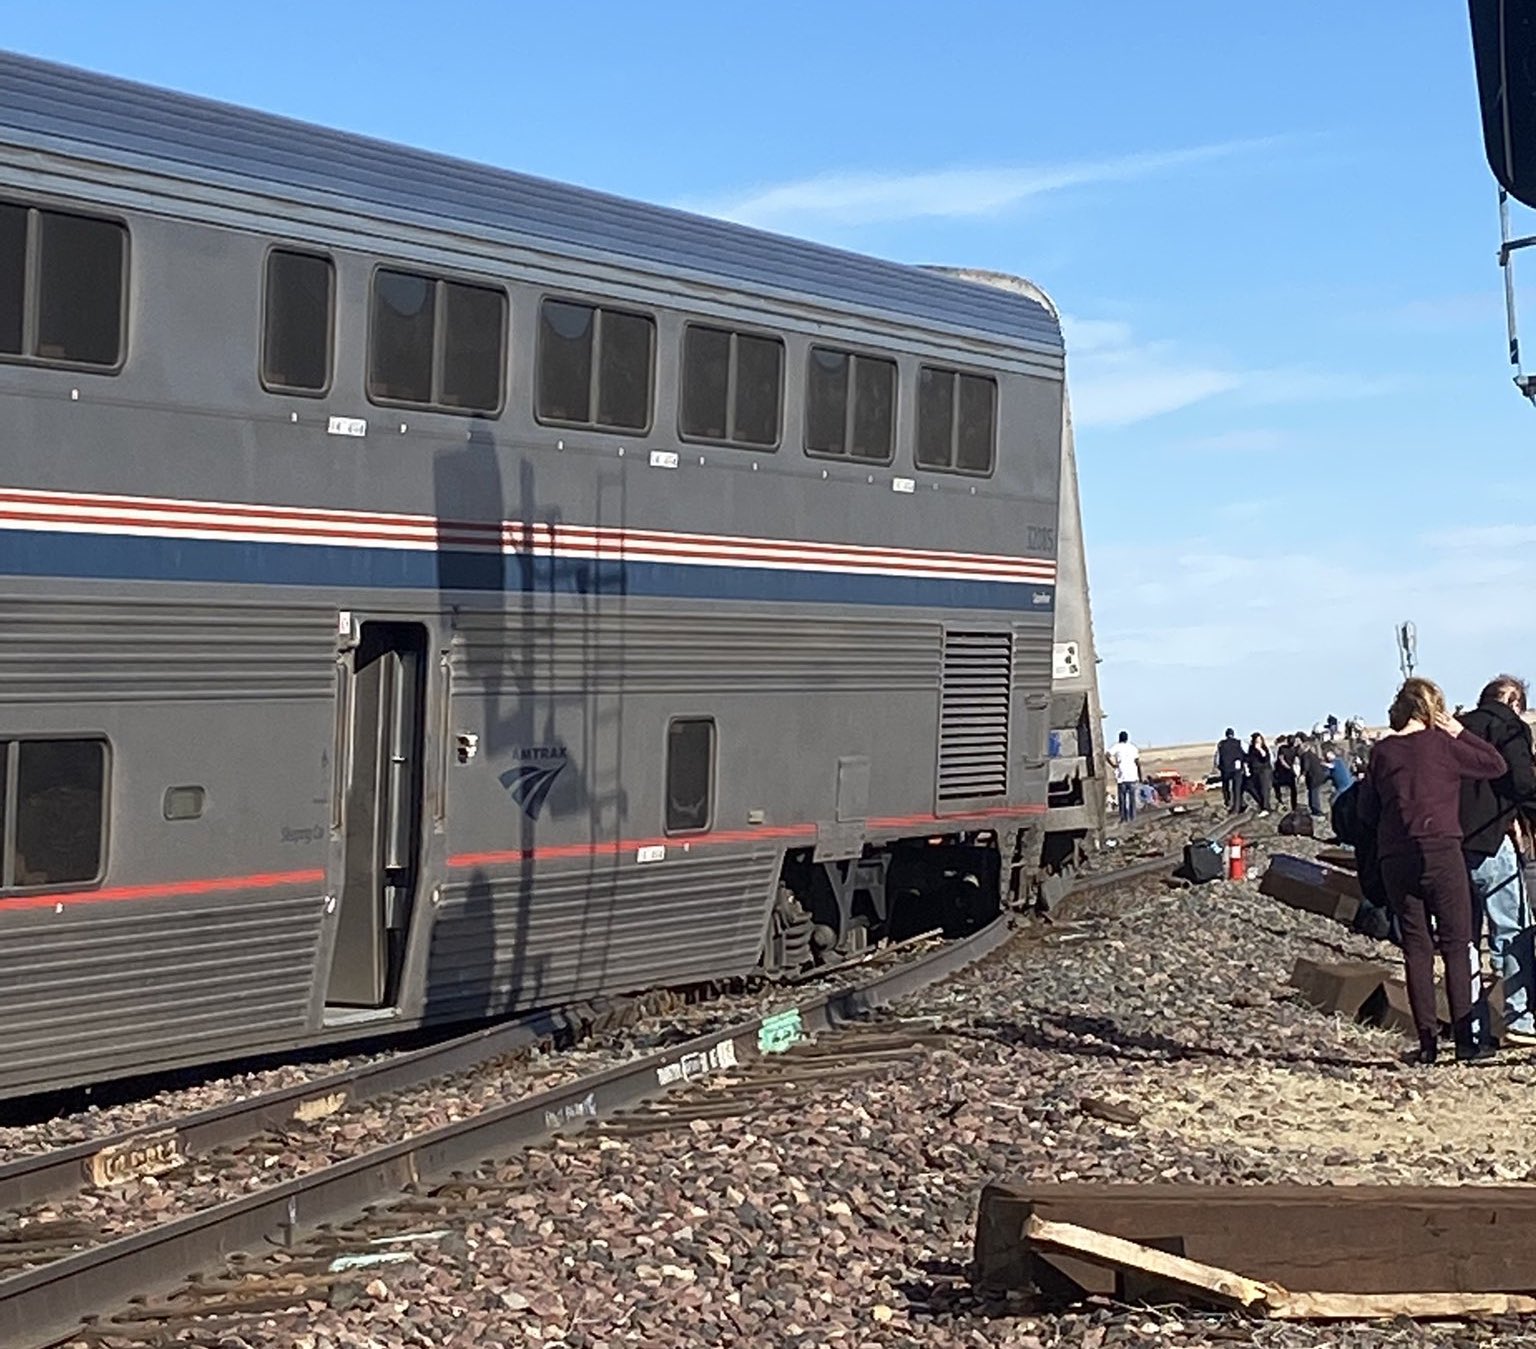 What Caused Amtrak Train To Derail?